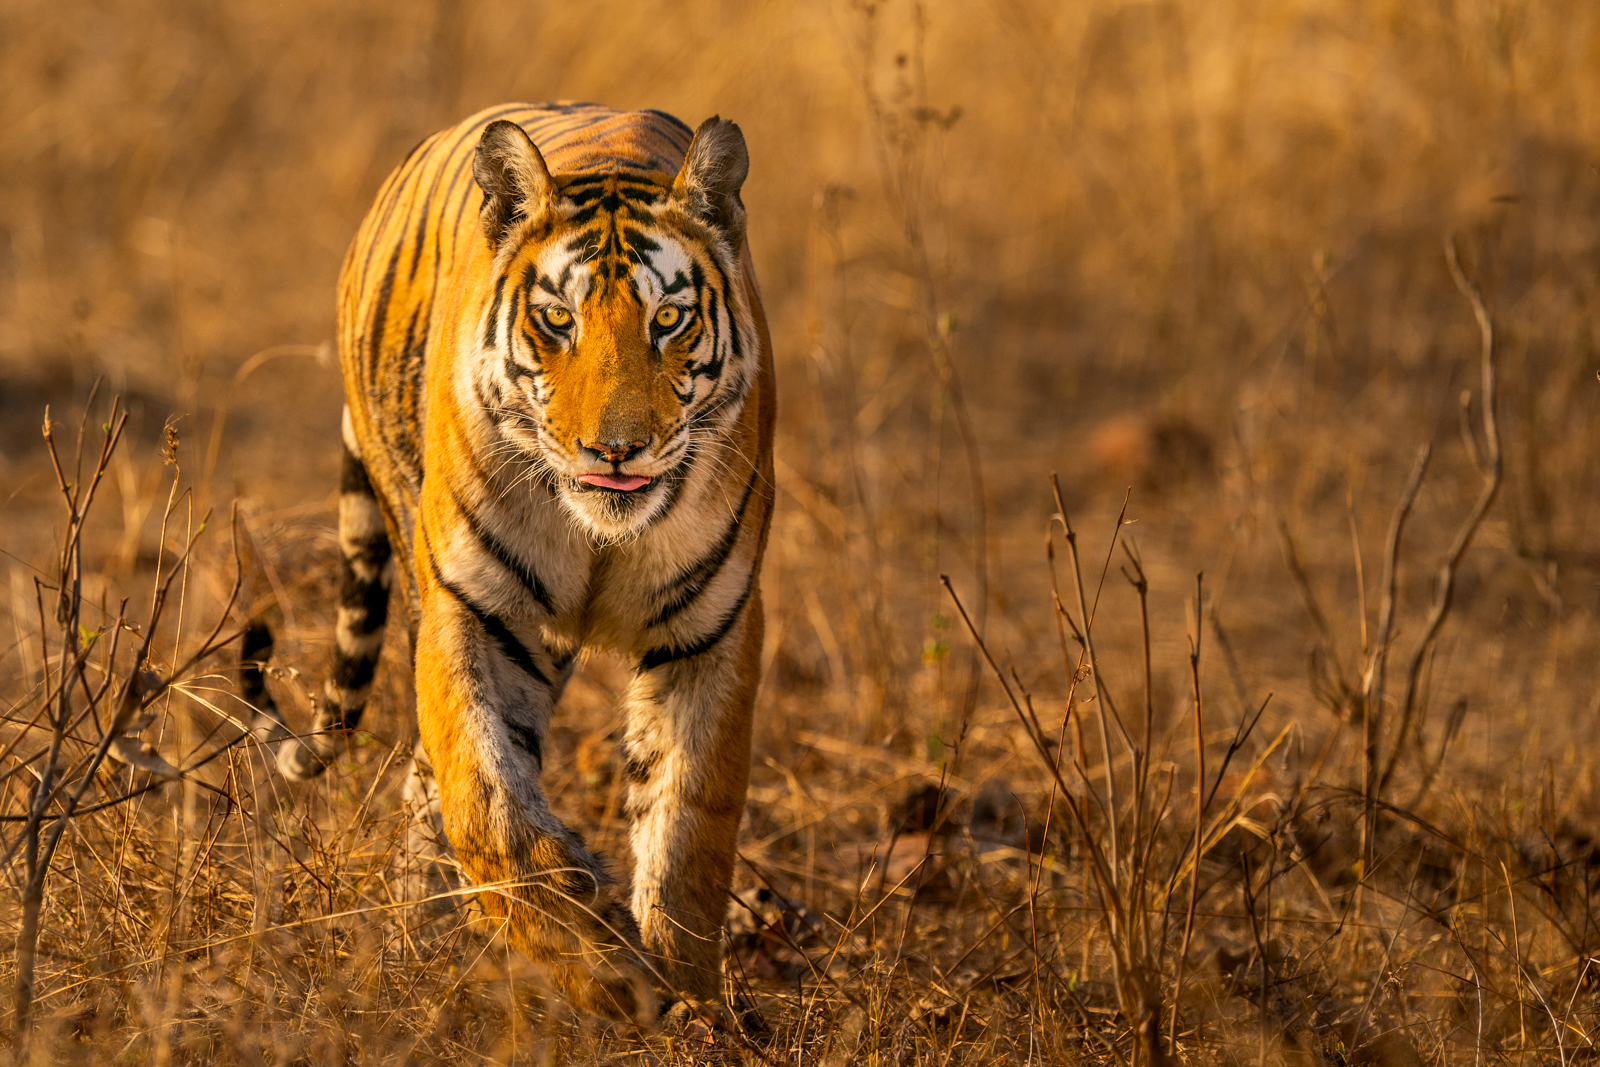 Tigers in India Photo Tour